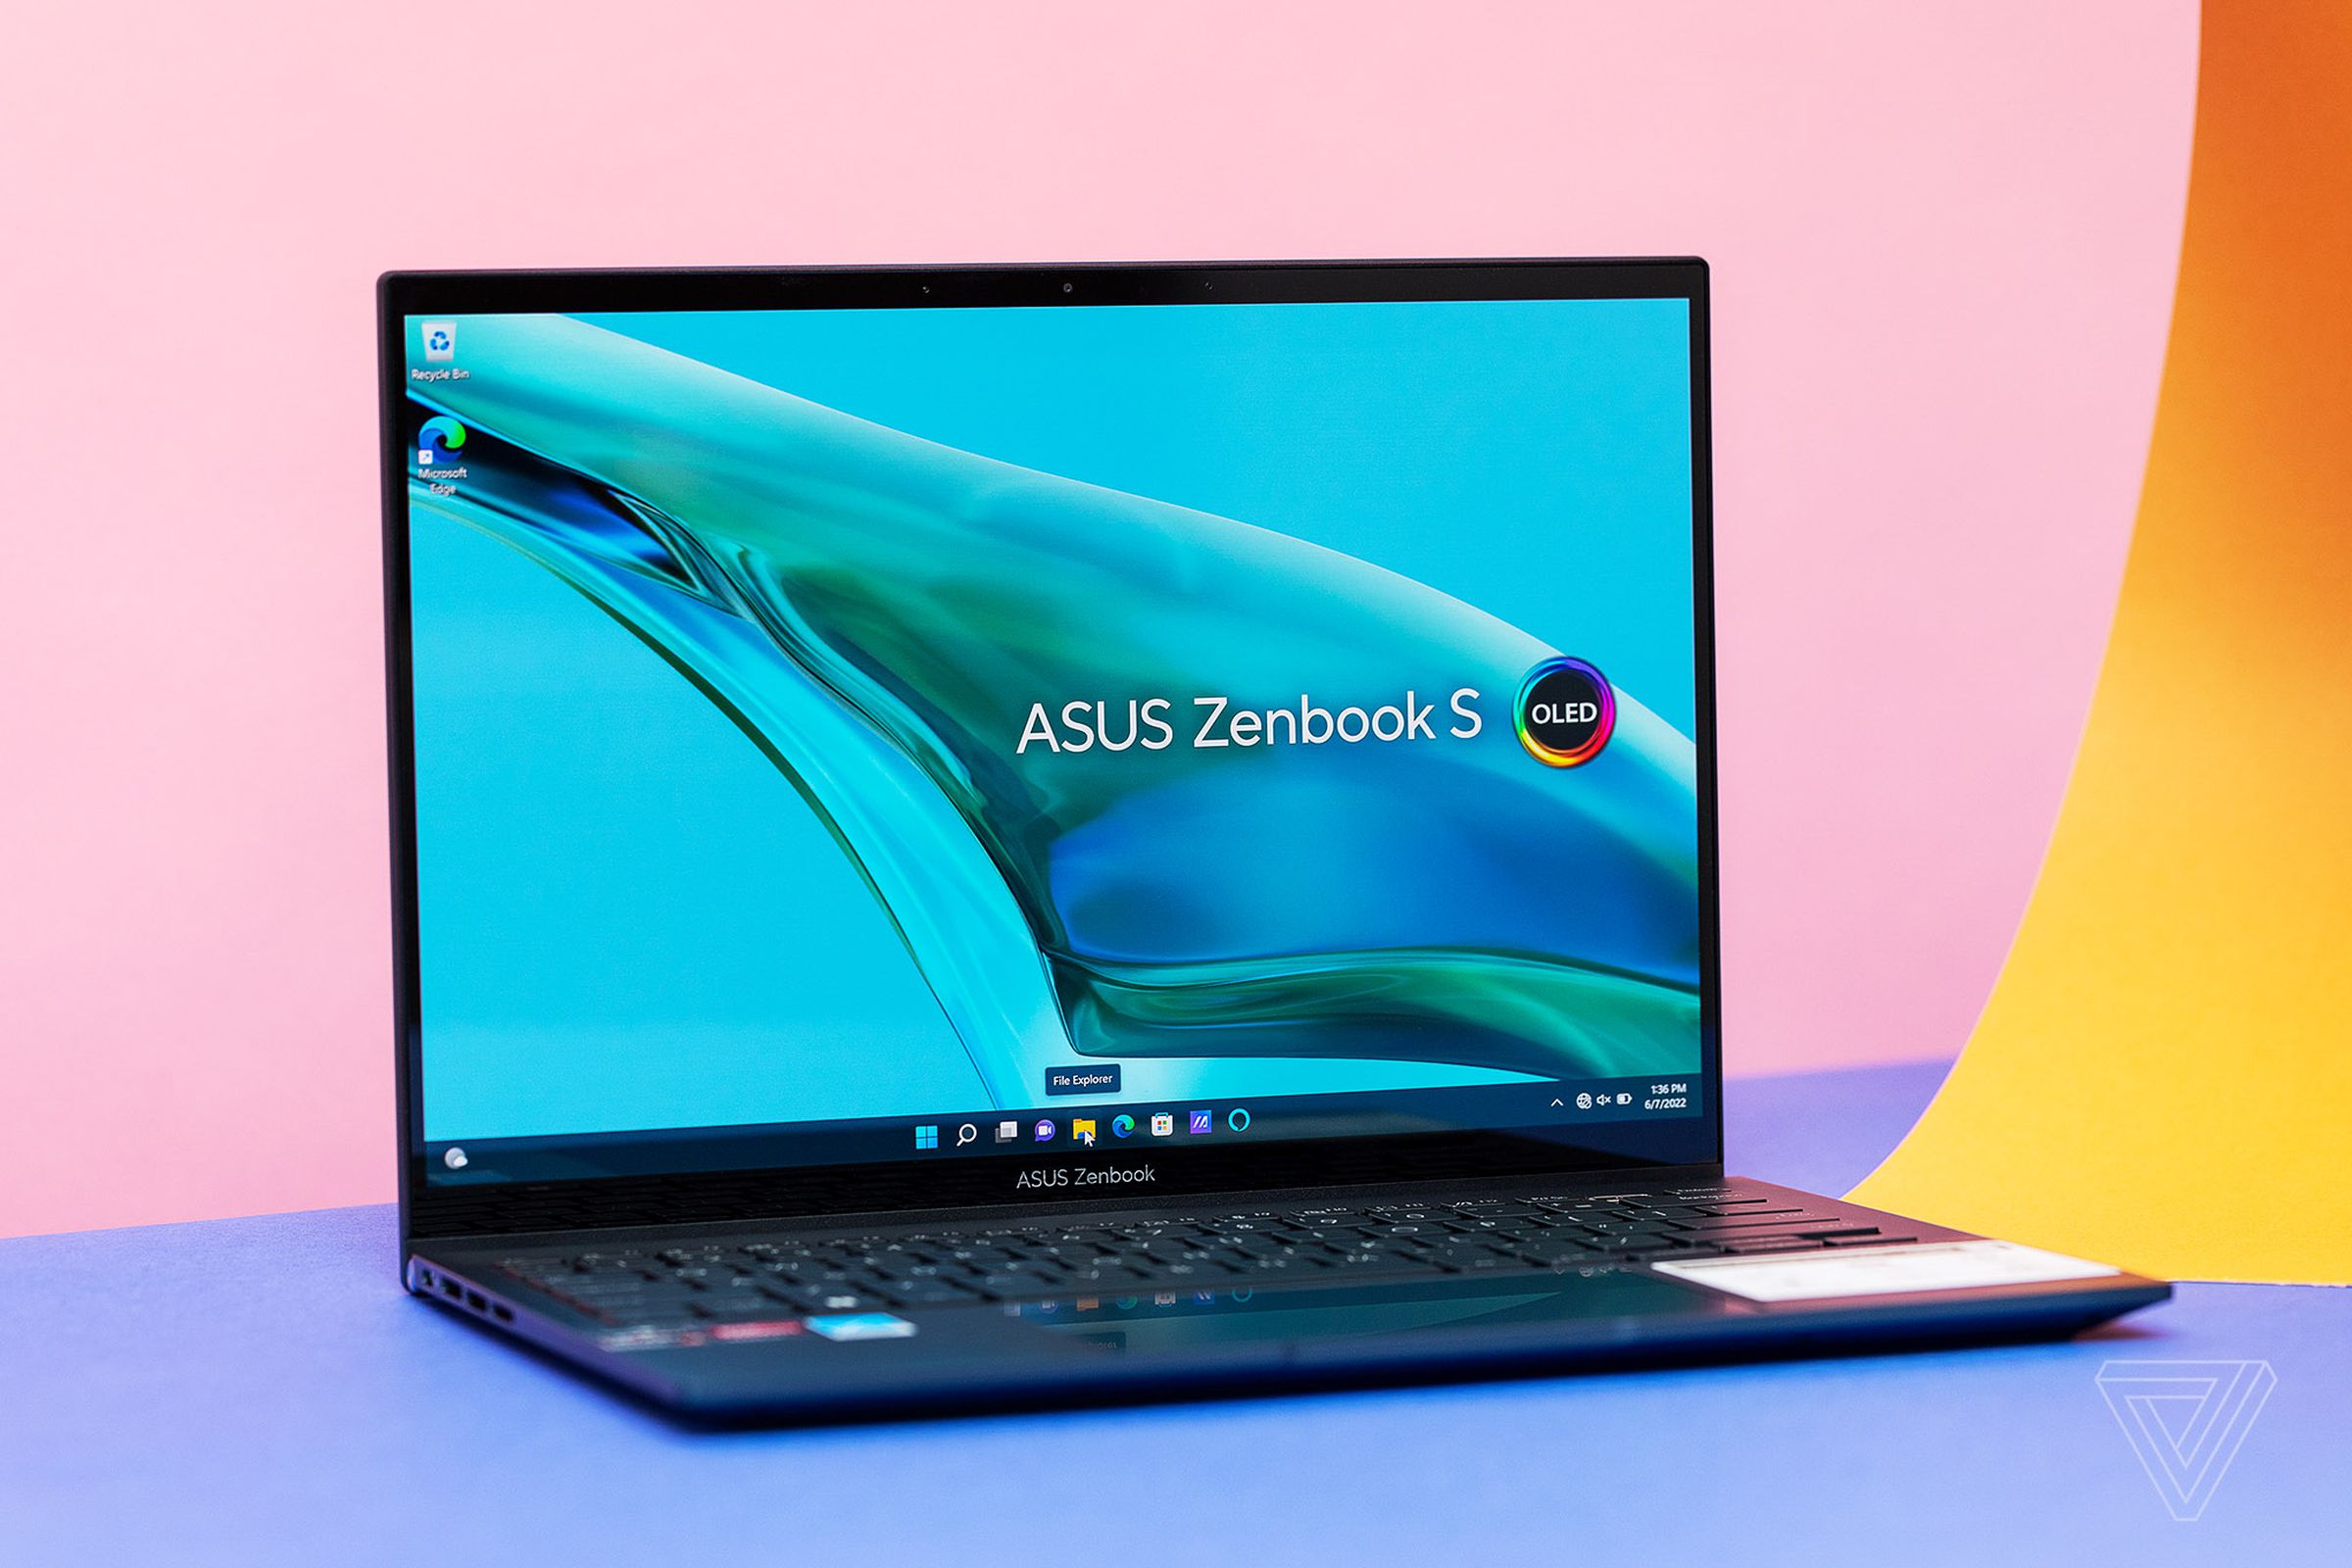 The Asus Zenbook S 13 OLED on a blue and pink background. The screen displays a stream of water on a blue background with the Asus Zenbook S OLED logo.